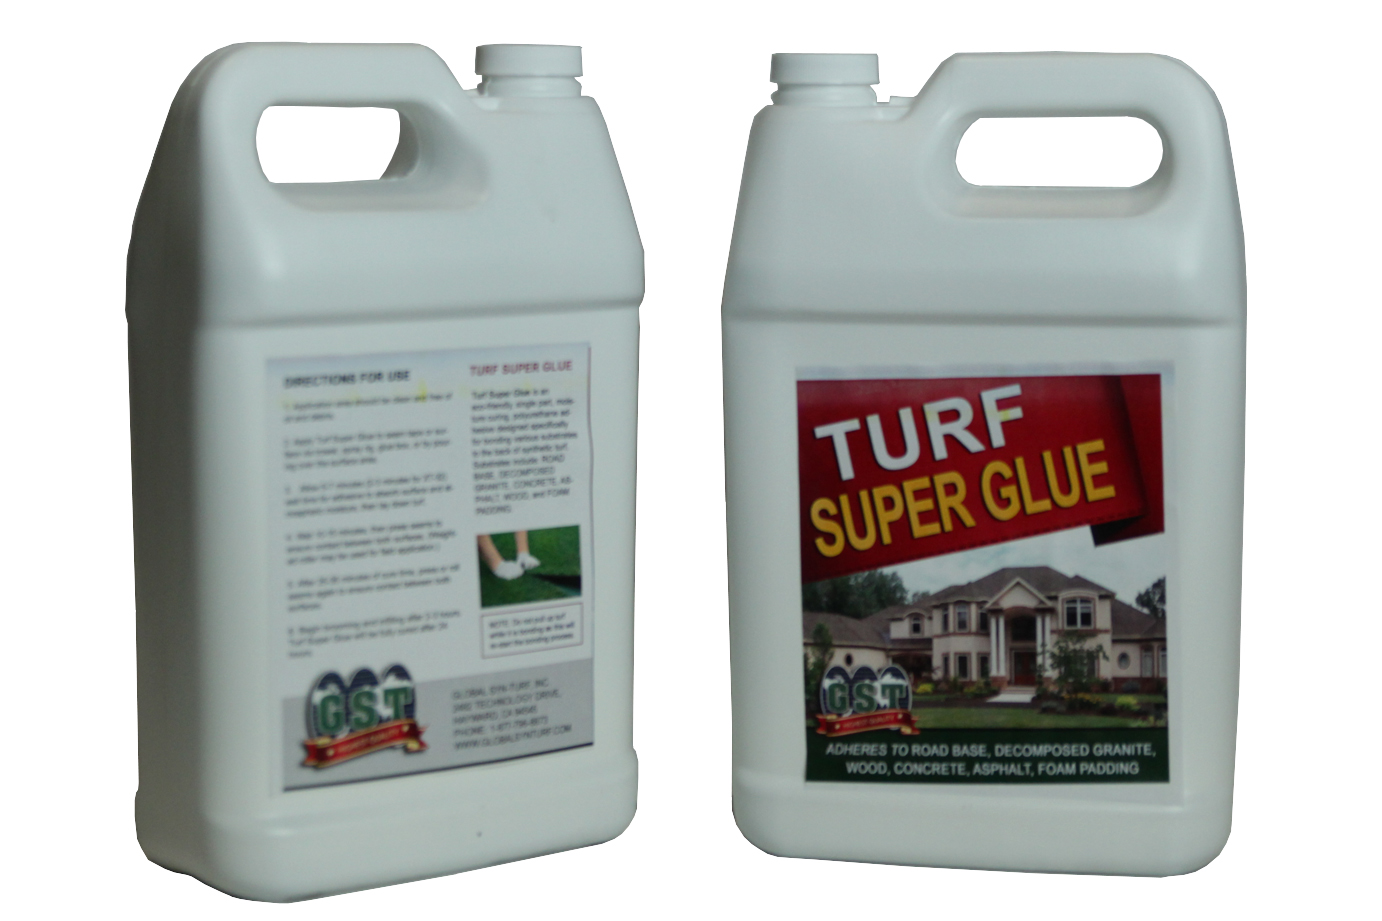 Turf Super Glue Synthetic Grass Synthetic Grass Tools Installation Houston,Texas